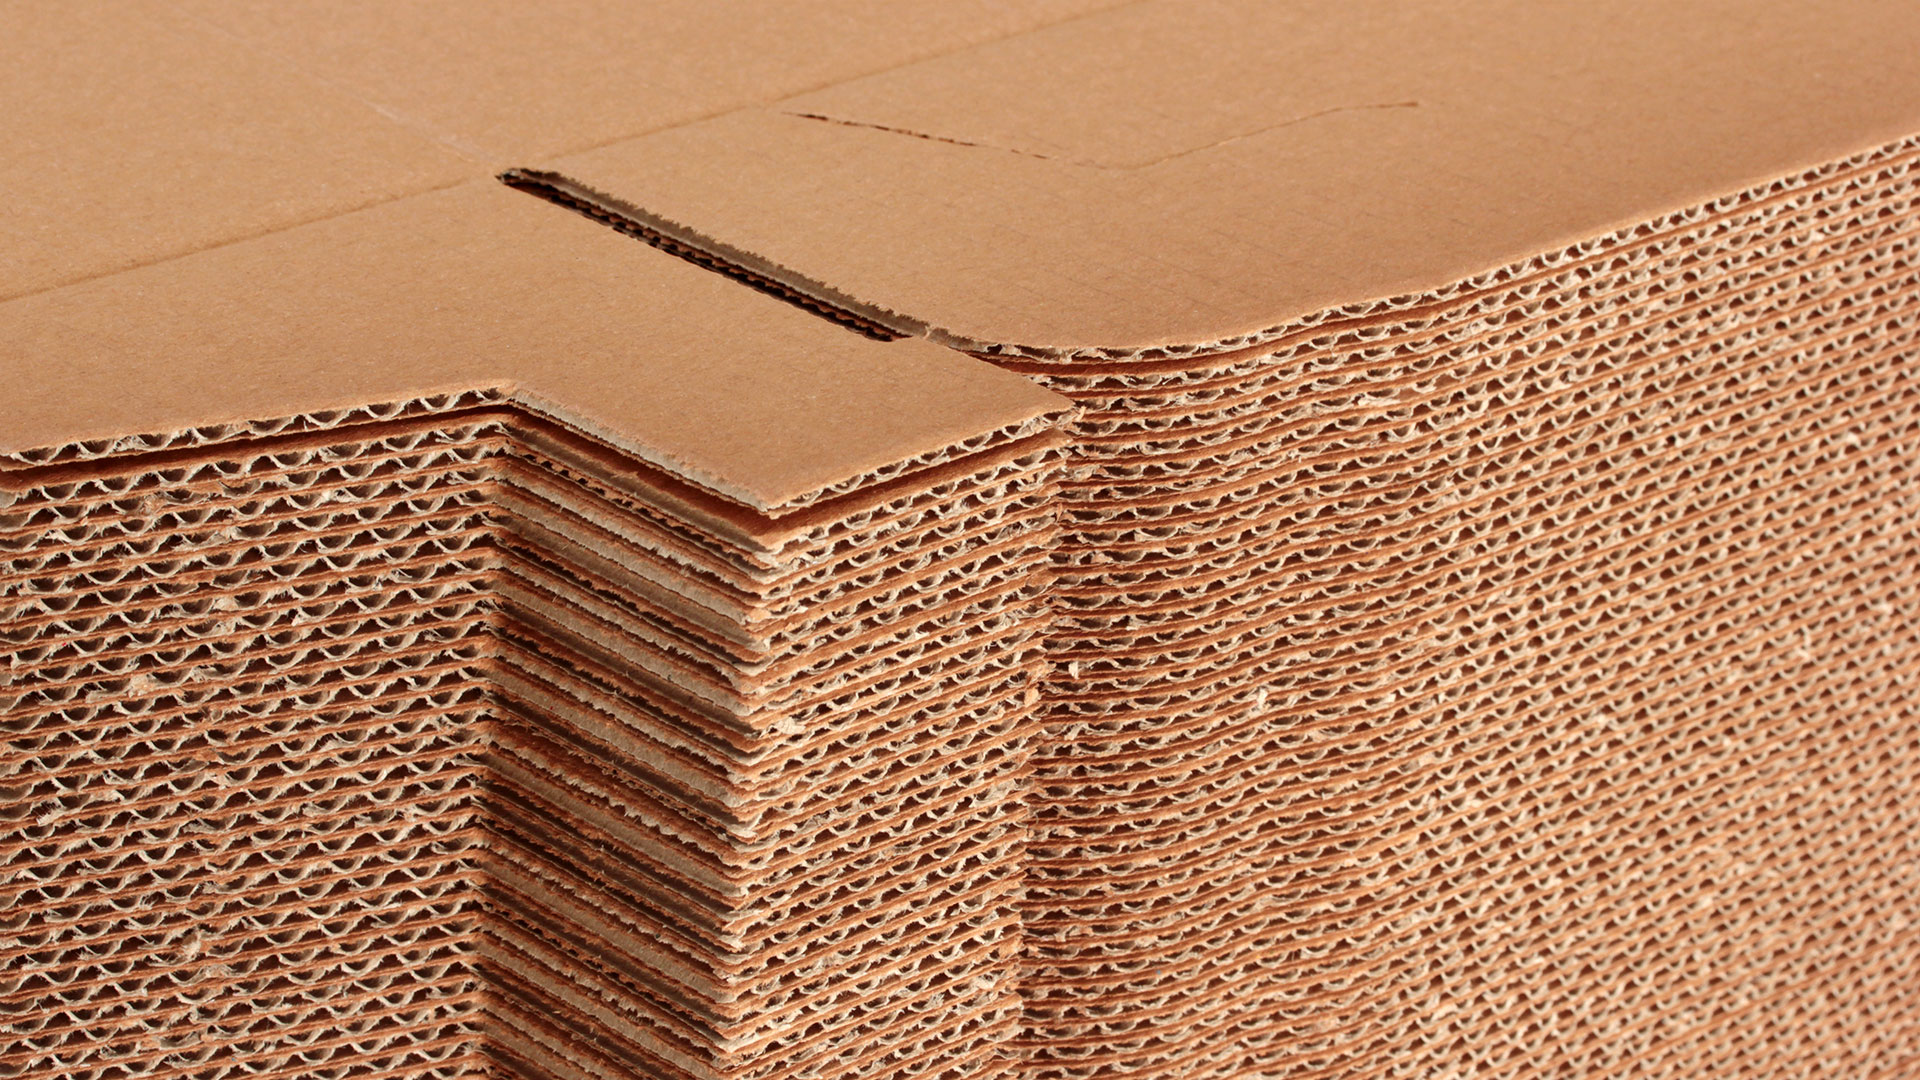  || Kutas Corrugated Cardboard Box Manufacturing | Single Corrugated Cardboard Box, Double Corrugated Cardboard Box, Food Boxes, Locked Boxes, Special Design Boxes, Textile Boxes, Automotive Sub-Industry Parts Boxes, Elevator Doors and Parts Boxes, Cooker - Stove Boxes, Pharmaceutical and Cosmetic Boxes, Cologne Boxes, Shoe - Boot Boxes, Agricultural Machinery Boxes, Agricultural Spraying Boxes, Rifles and Explosives Boxes, Barbecue and Charcoal Boxes, Electronic Materials Boxes, Bolt Boxes, Oil Paint Boxes, Gear and Stud Boxes, Sack Boxes, Base and Furniture Accessory Boxes, Hardware Boxes , Archive Boxes, Auto Cover and Accessory Boxes, Medical Device Boxes, Heat Insulation Boxes, Watch and Promotional Boxes, LPG Tank Boxes, Milling Machinery Boxes, Wheelbarrow Boxes, Dairy Products and Olive Boxes, Okra Boxes, Pizza, Meat Bread and Pastry Boxes , Biscuit, Cake, Nuts and Turkish Delight Boxes, Pulses Boxes, Meat and Meat Products Boxes, Candy, Chocolate, Wafer Boxes, Organic Agricultural Products Boxes Beer, Olive Oil, Molasses, Honey, Jam Boxes, Canned Boxes, Compartmented Ready Meal Boxes, Bakery Boxes, Raw Meatball Boxes, Salt - Spice Boxes